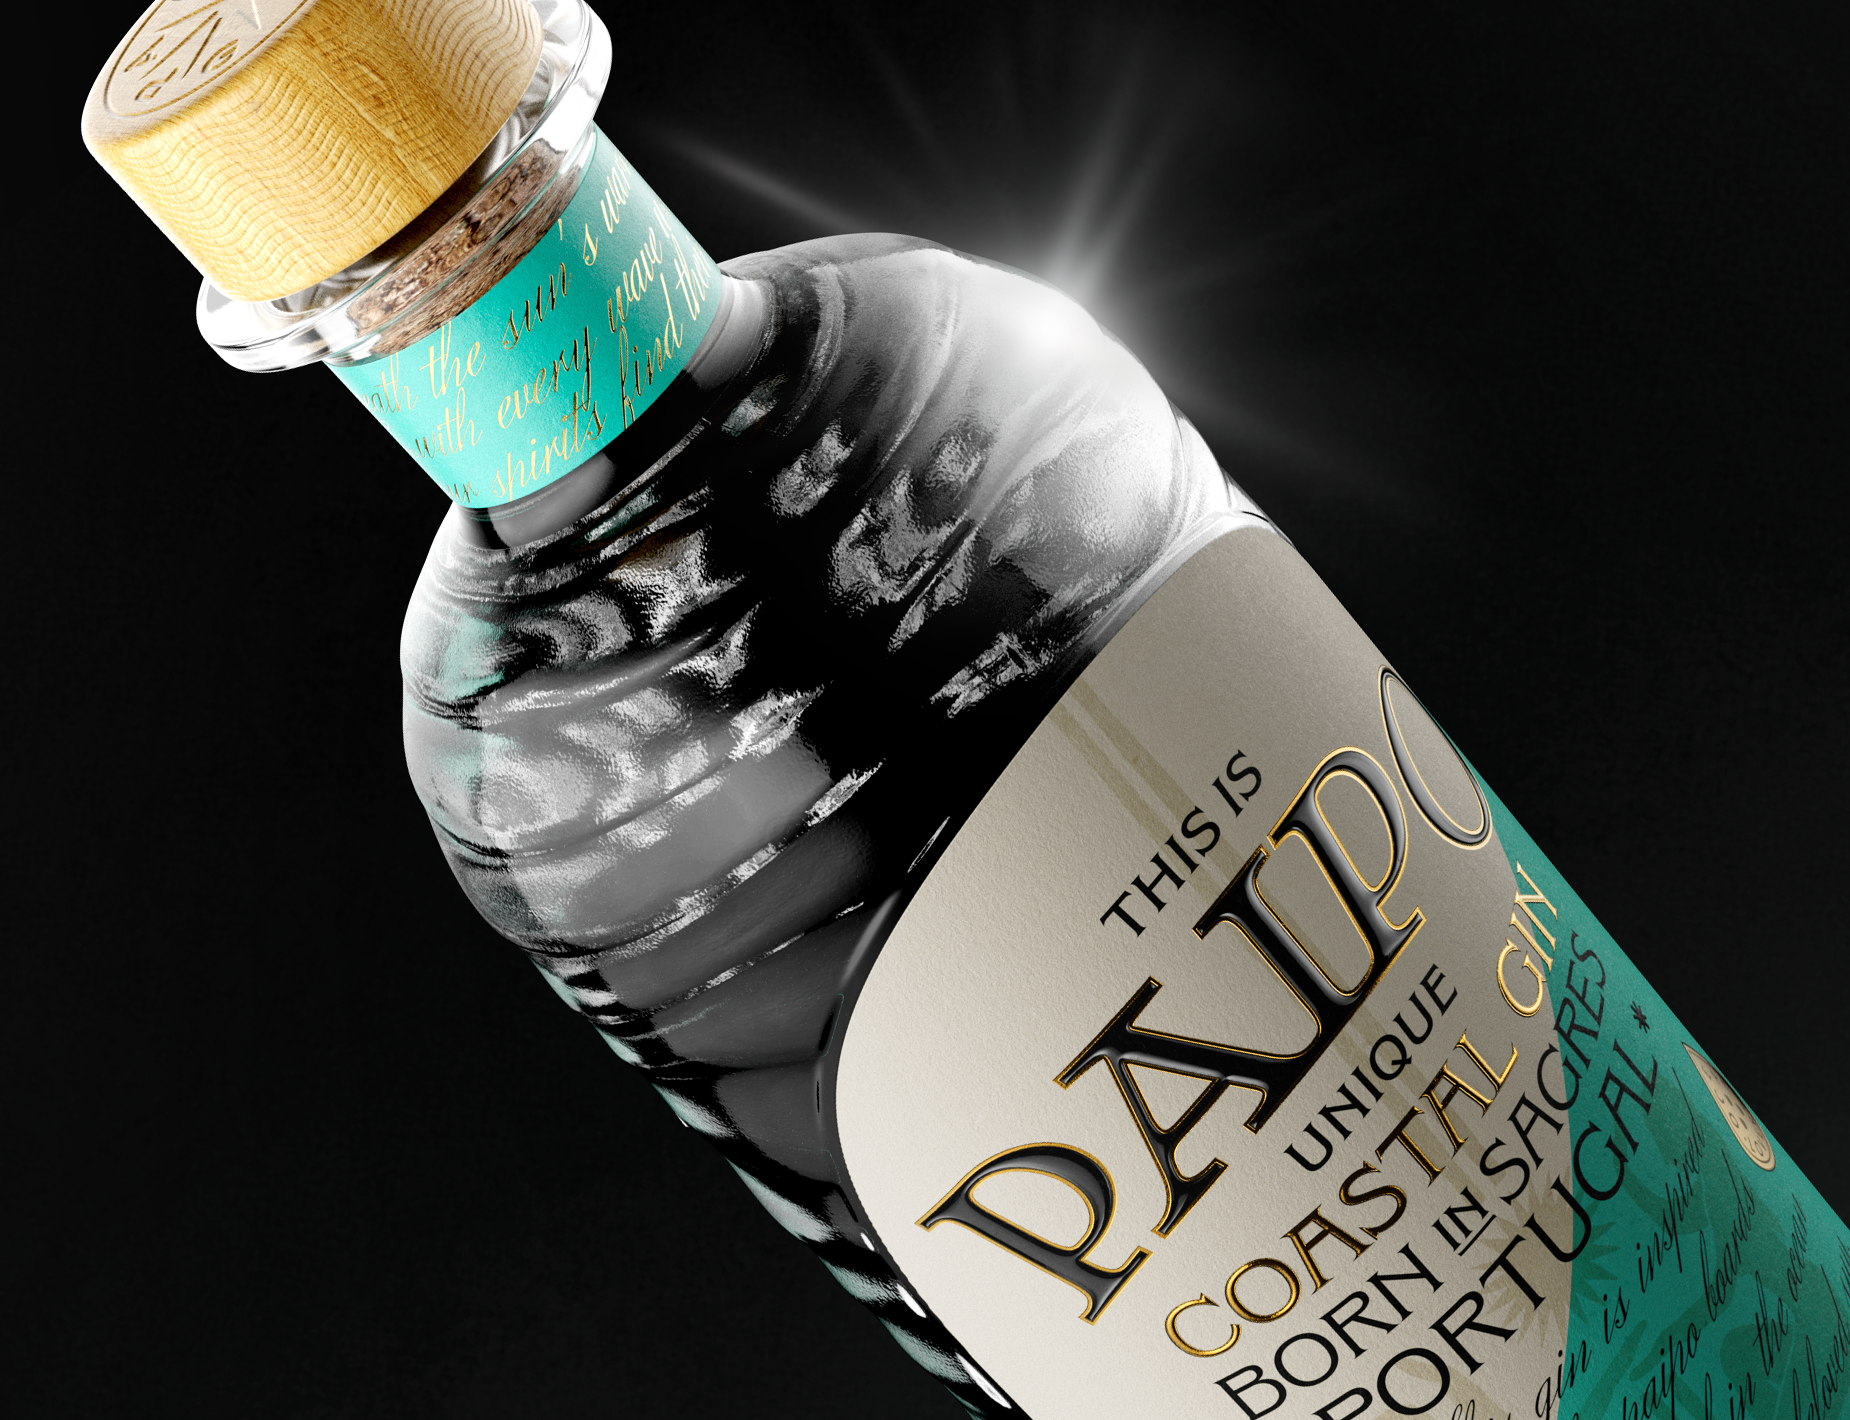 Paipo Gin’s Shiny, Wavy Bottle Design is a Feast for the Senses